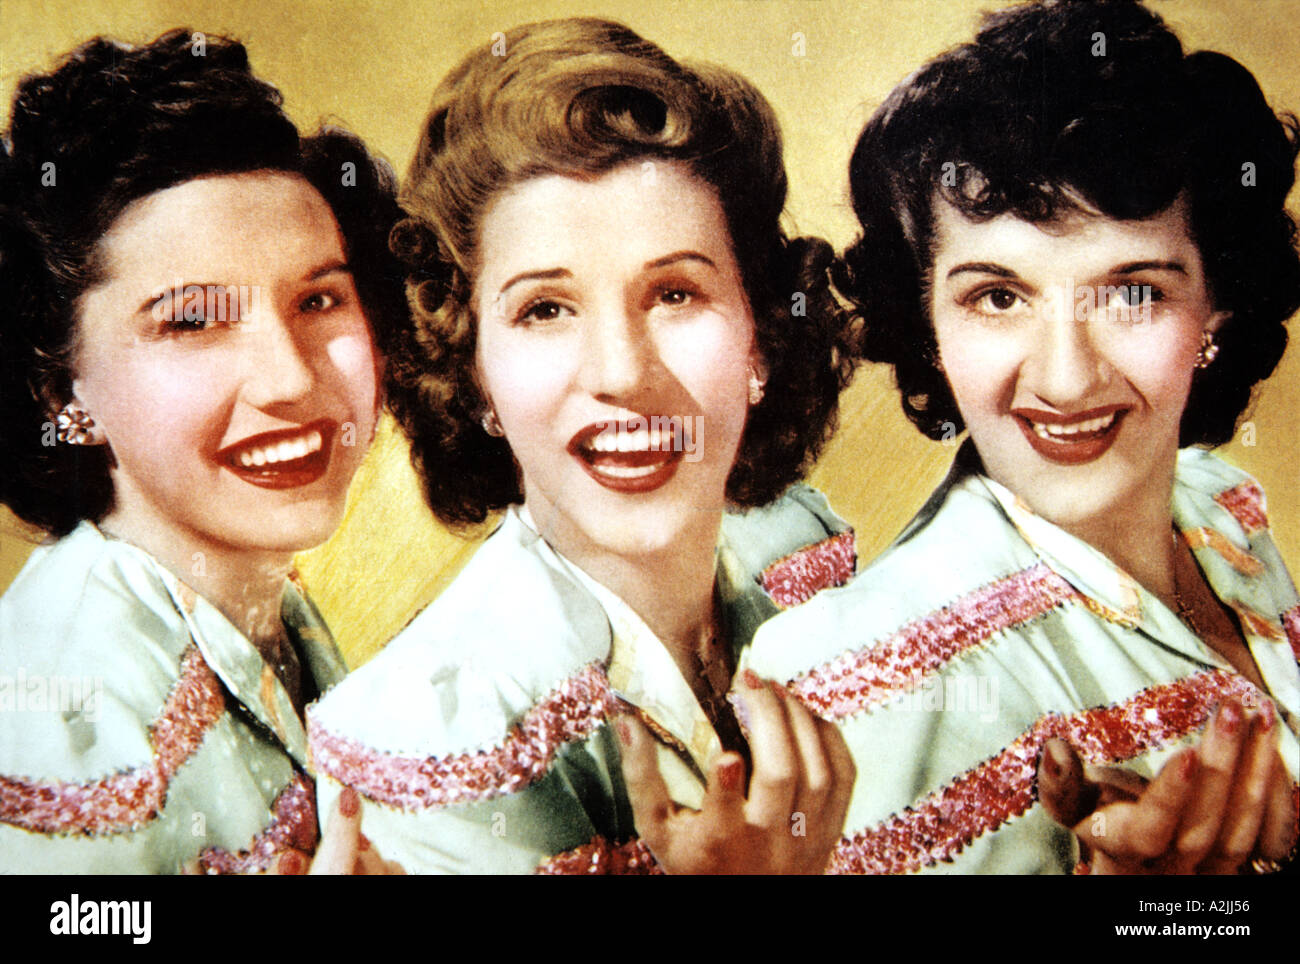 ANDREWS SISTERS American close harmony group who appeared in several films in the 1940s. from left Maxene, Patty and LaVerne Stock Photo